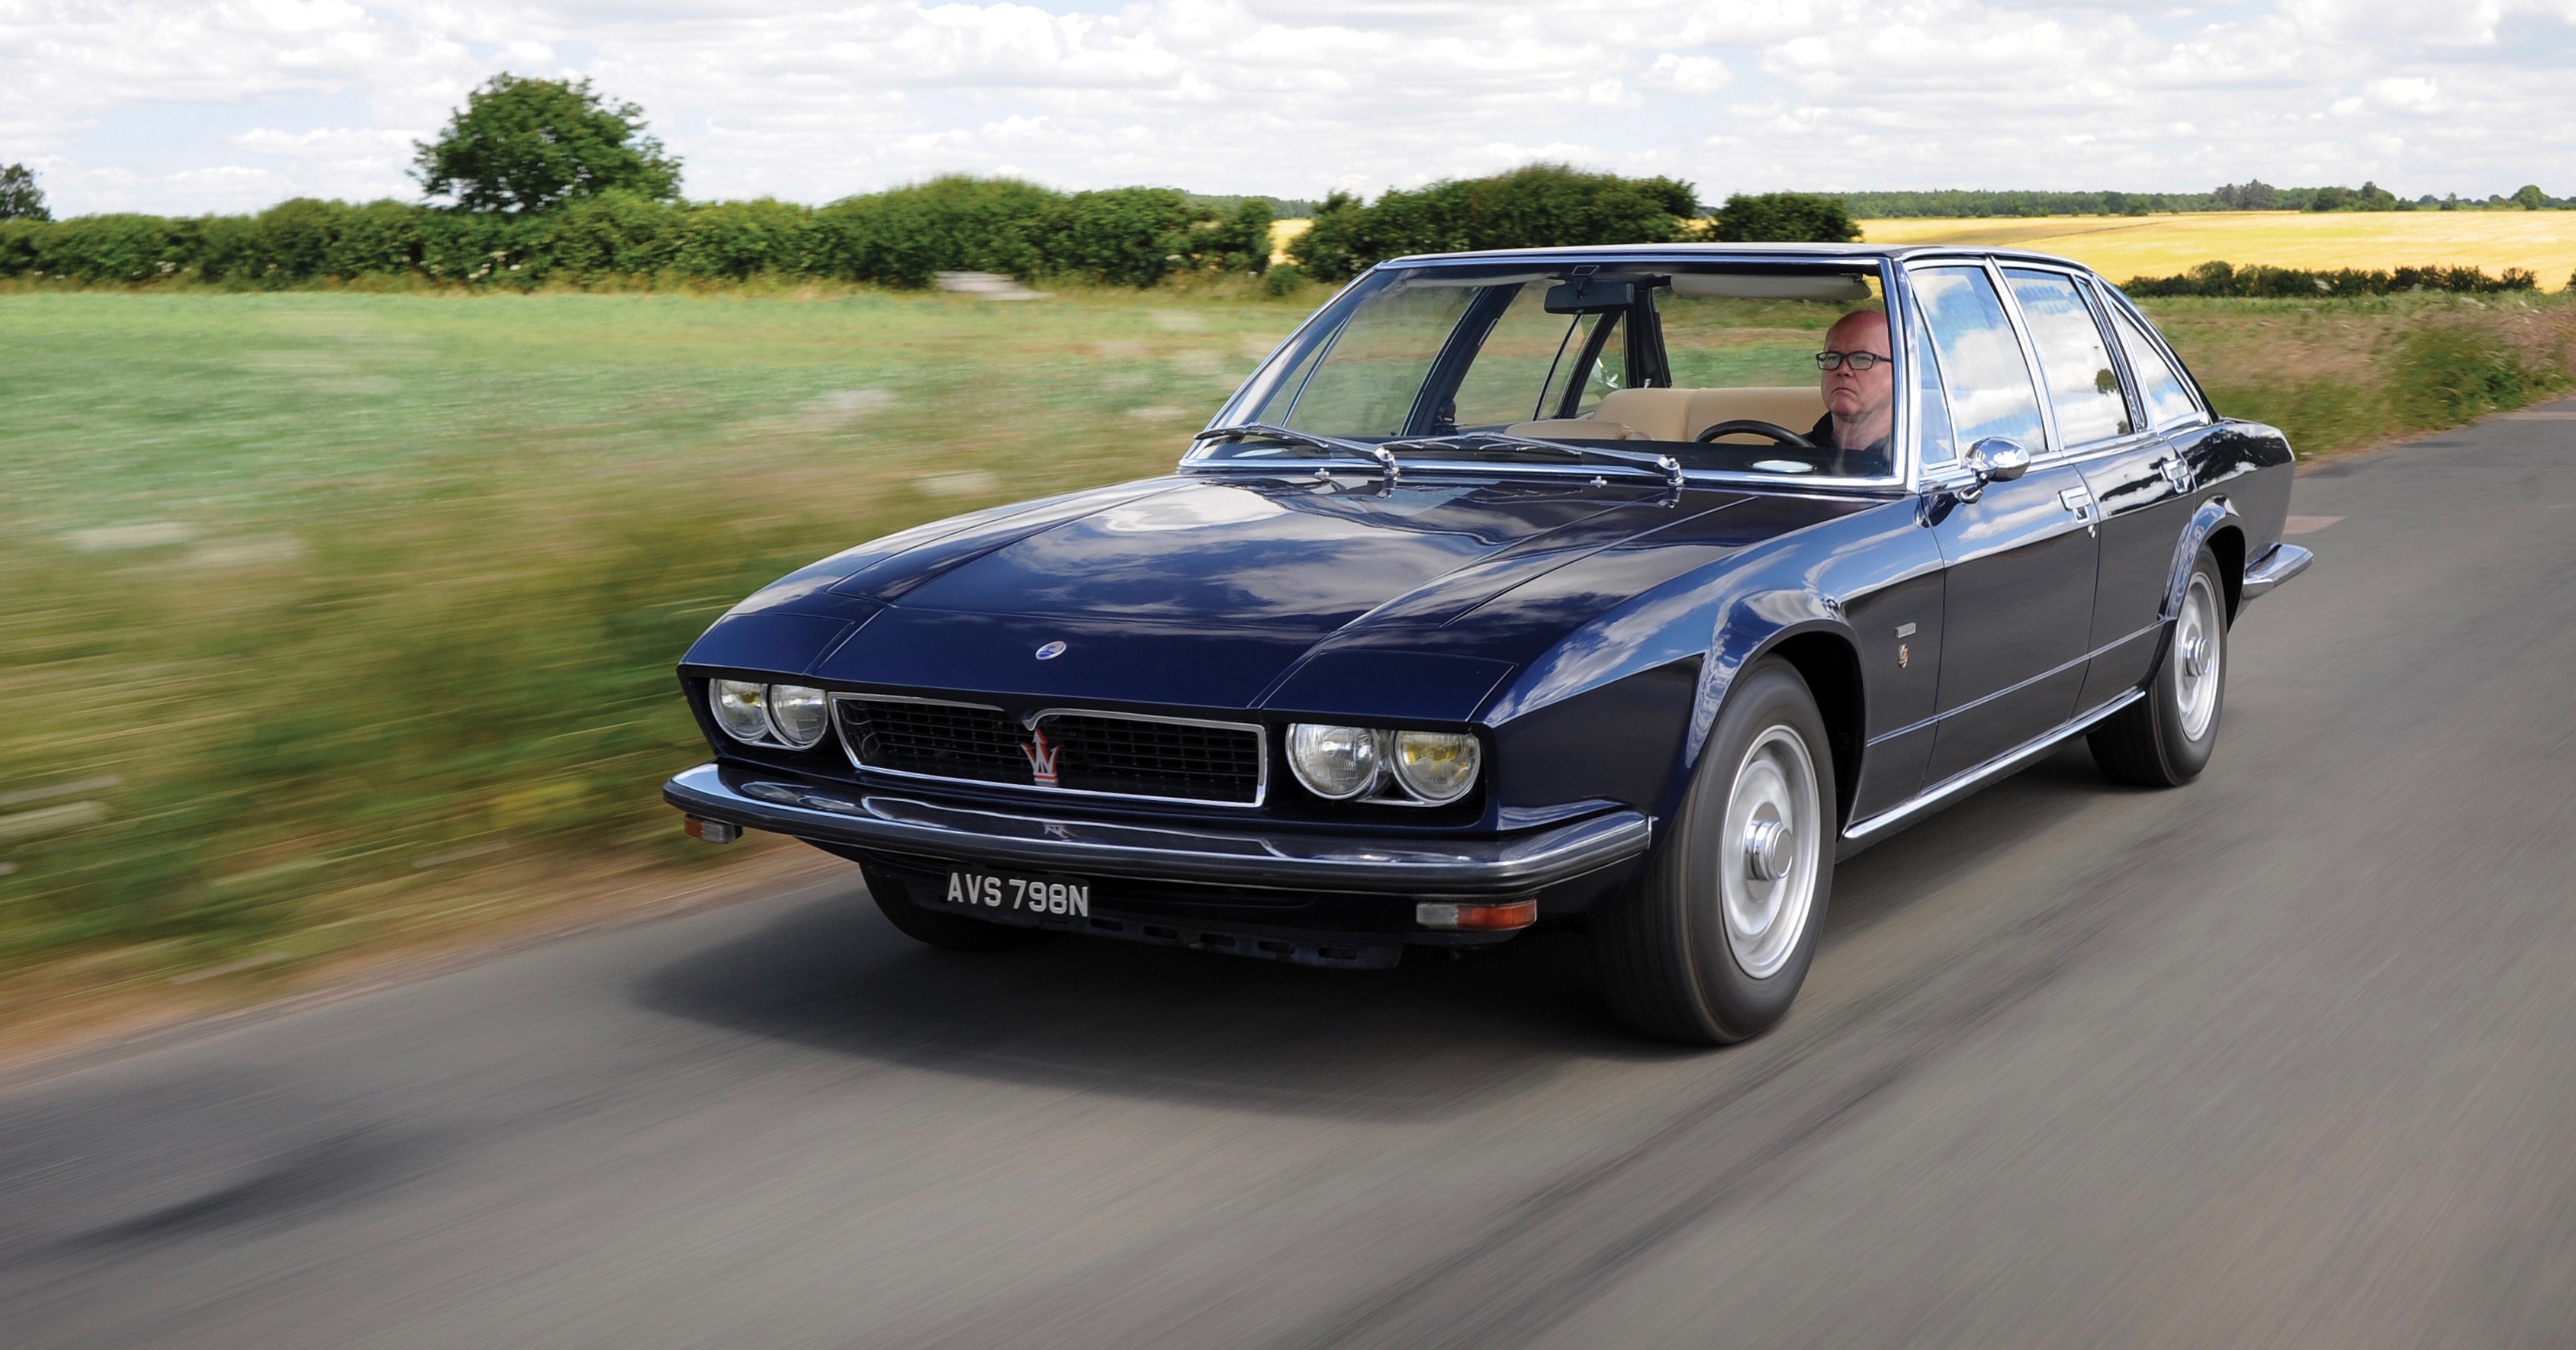 RM Sotheby's, Celebrity 6-Pack: RM Sotheby’s lands Maserati collection for London sale, ClassicCars.com Journal